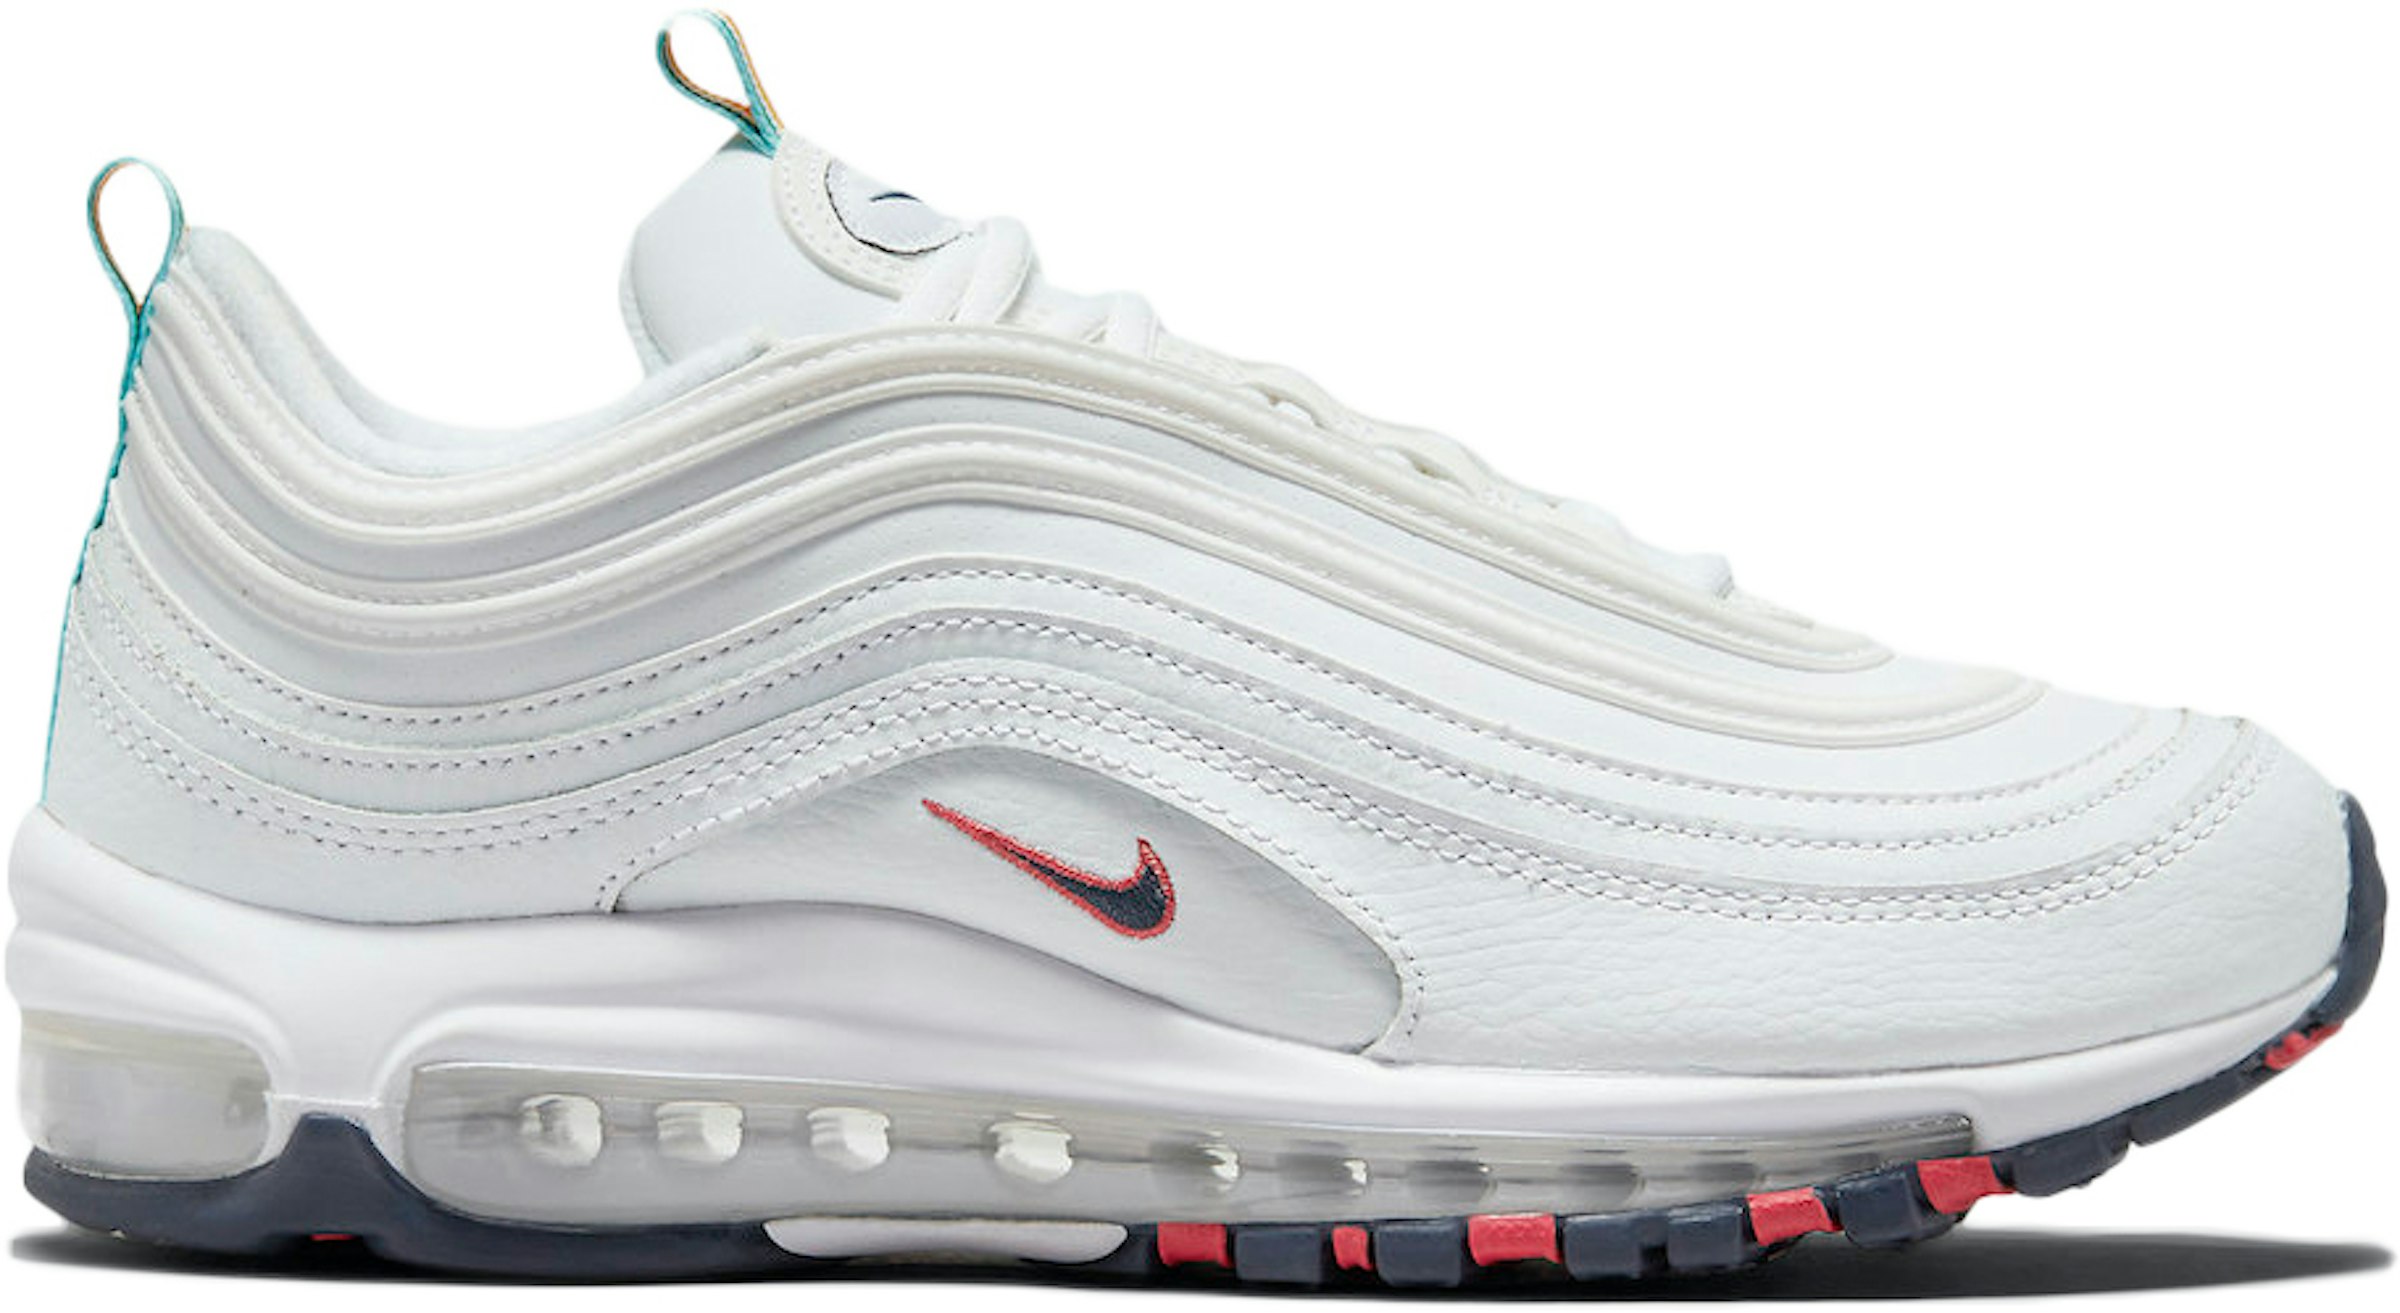 Nike Air 97 White Multi Color Tabs (Women's) - DH1592-100 - US